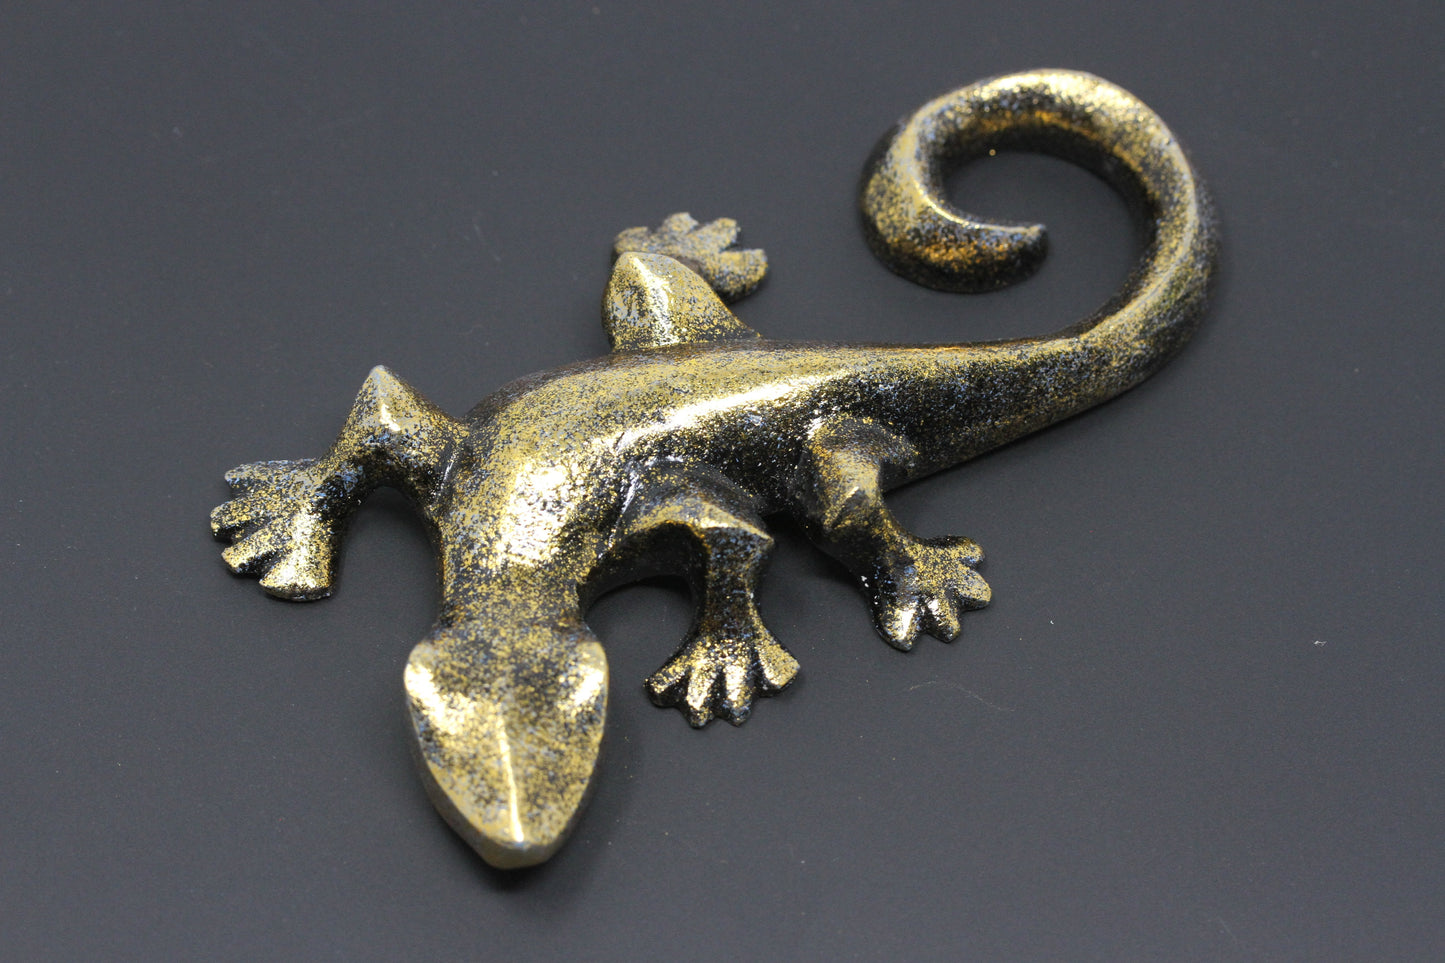 Wood Carved and Painted Lizard